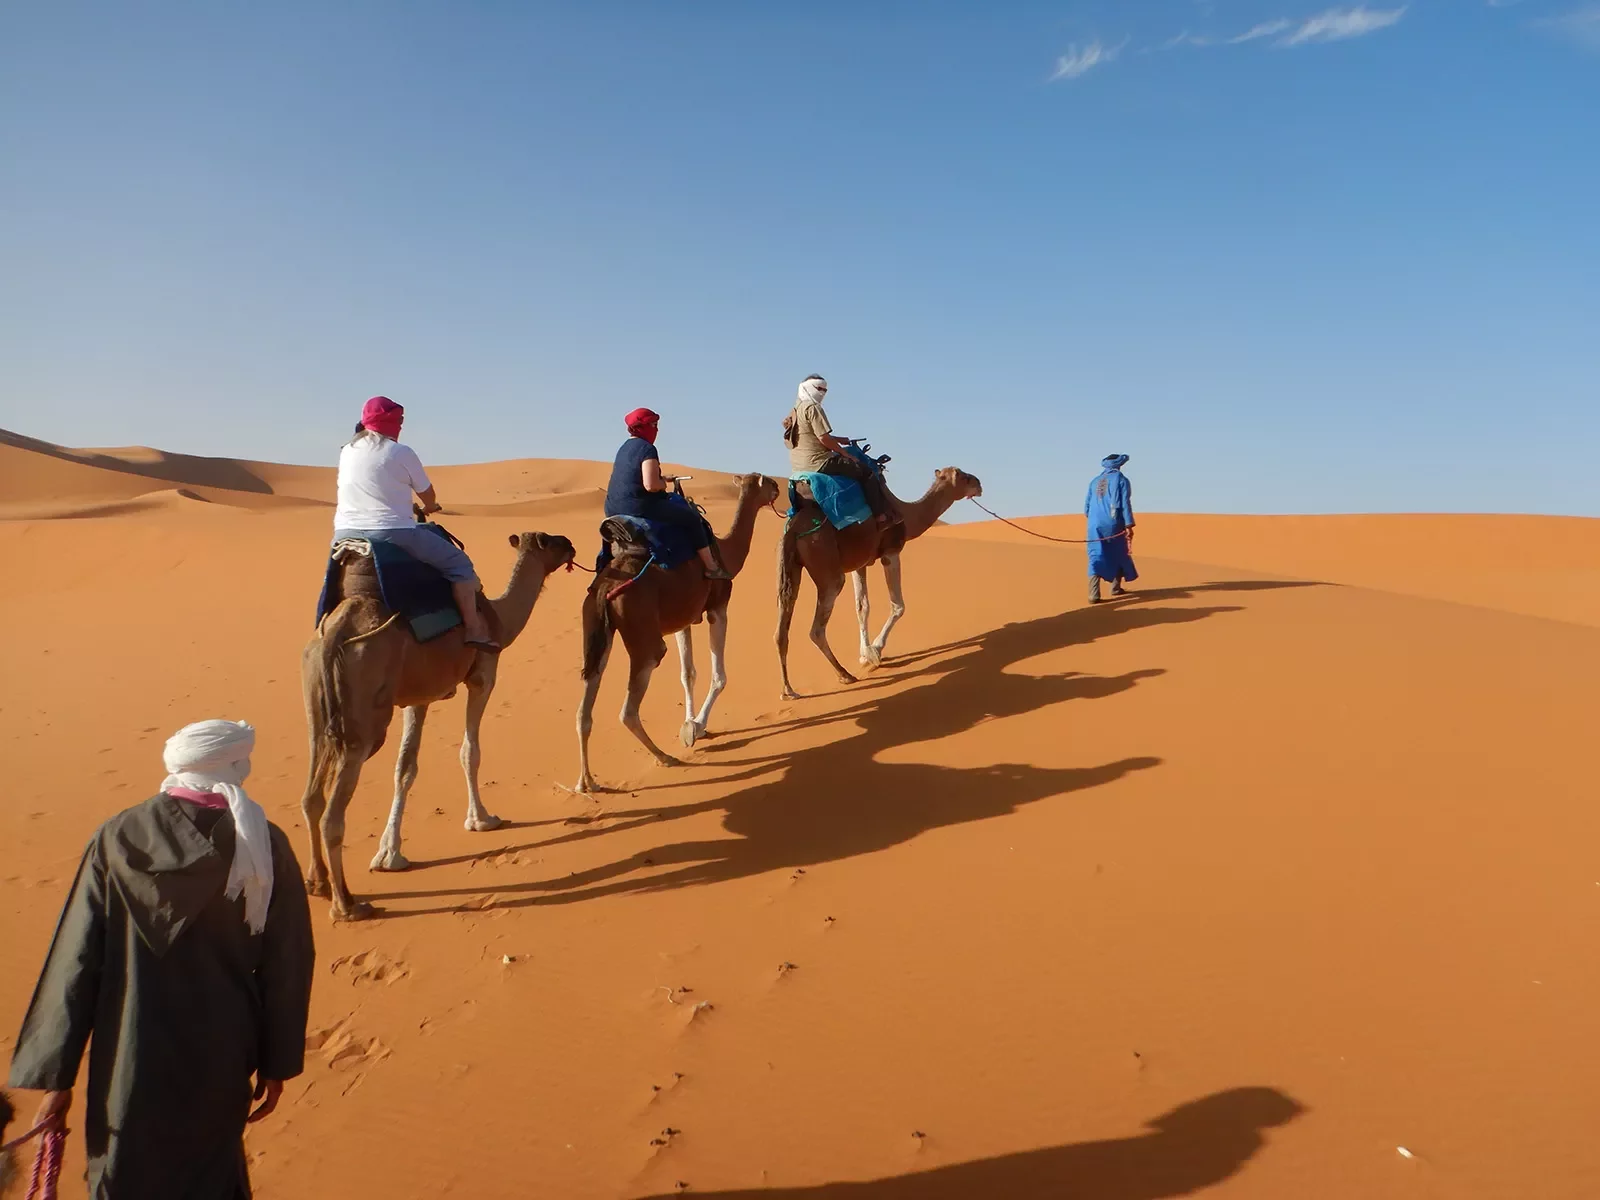 A line of travelers on camels in dunes